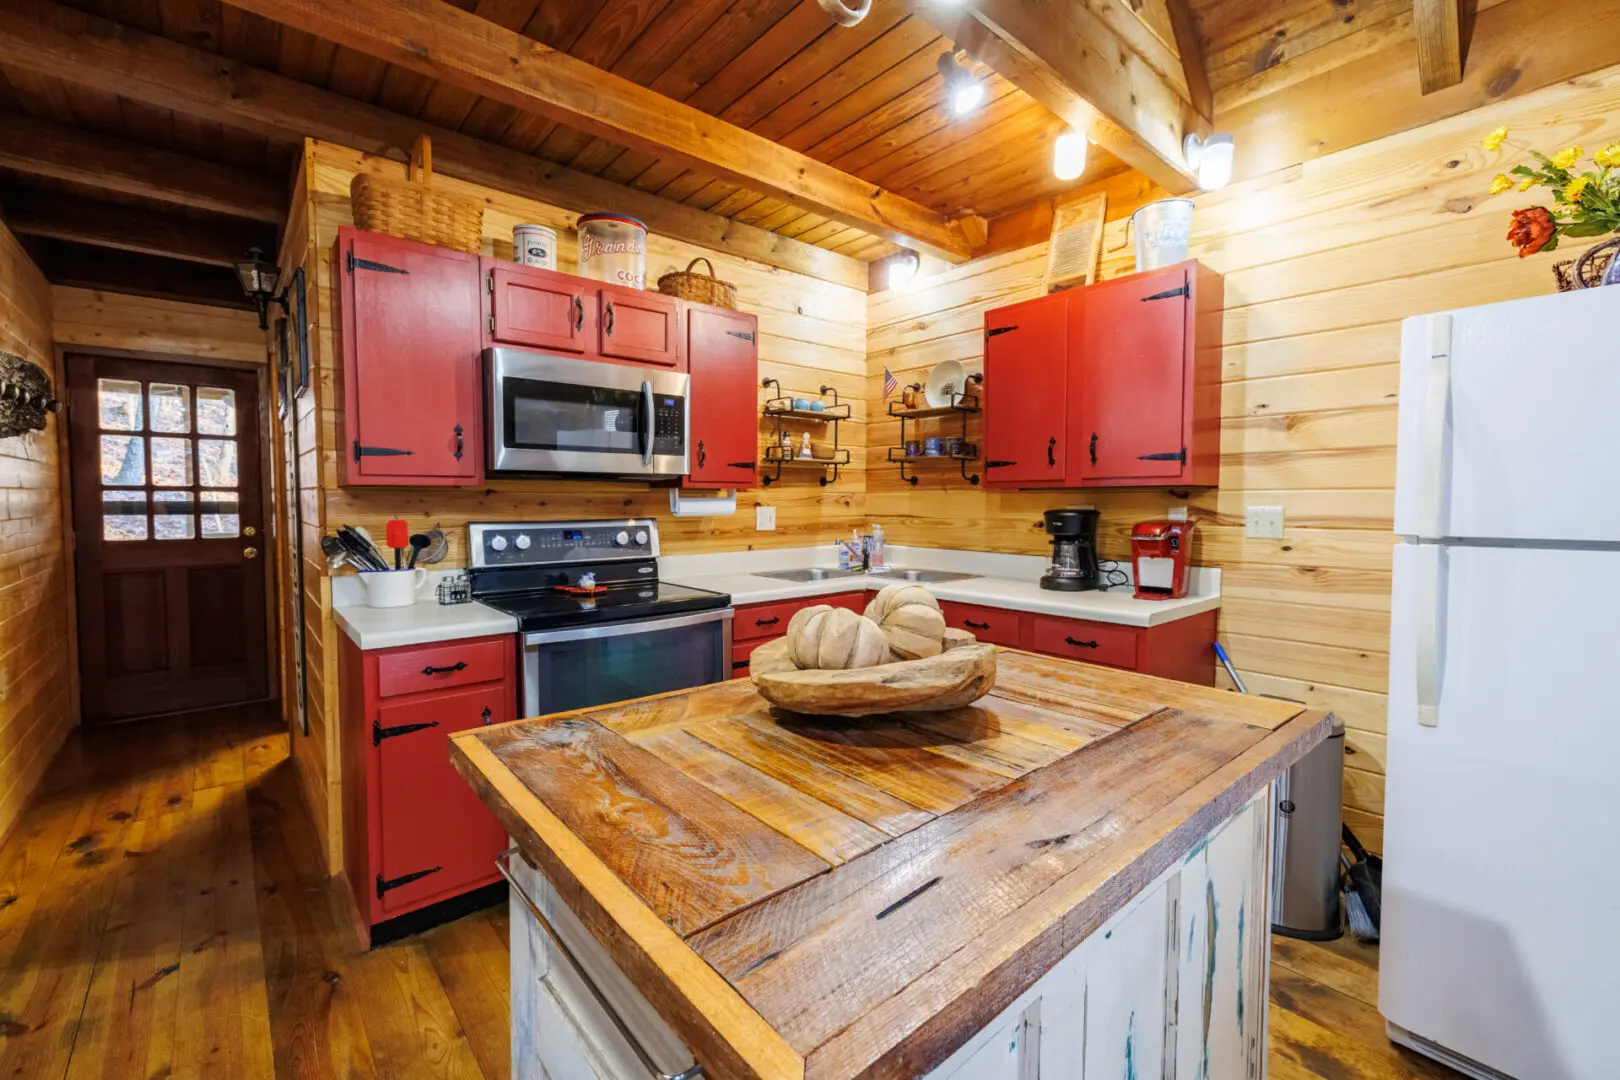 A rustic log cabin kitchen with red cabinets, perfect for a cozy vacation getaway.